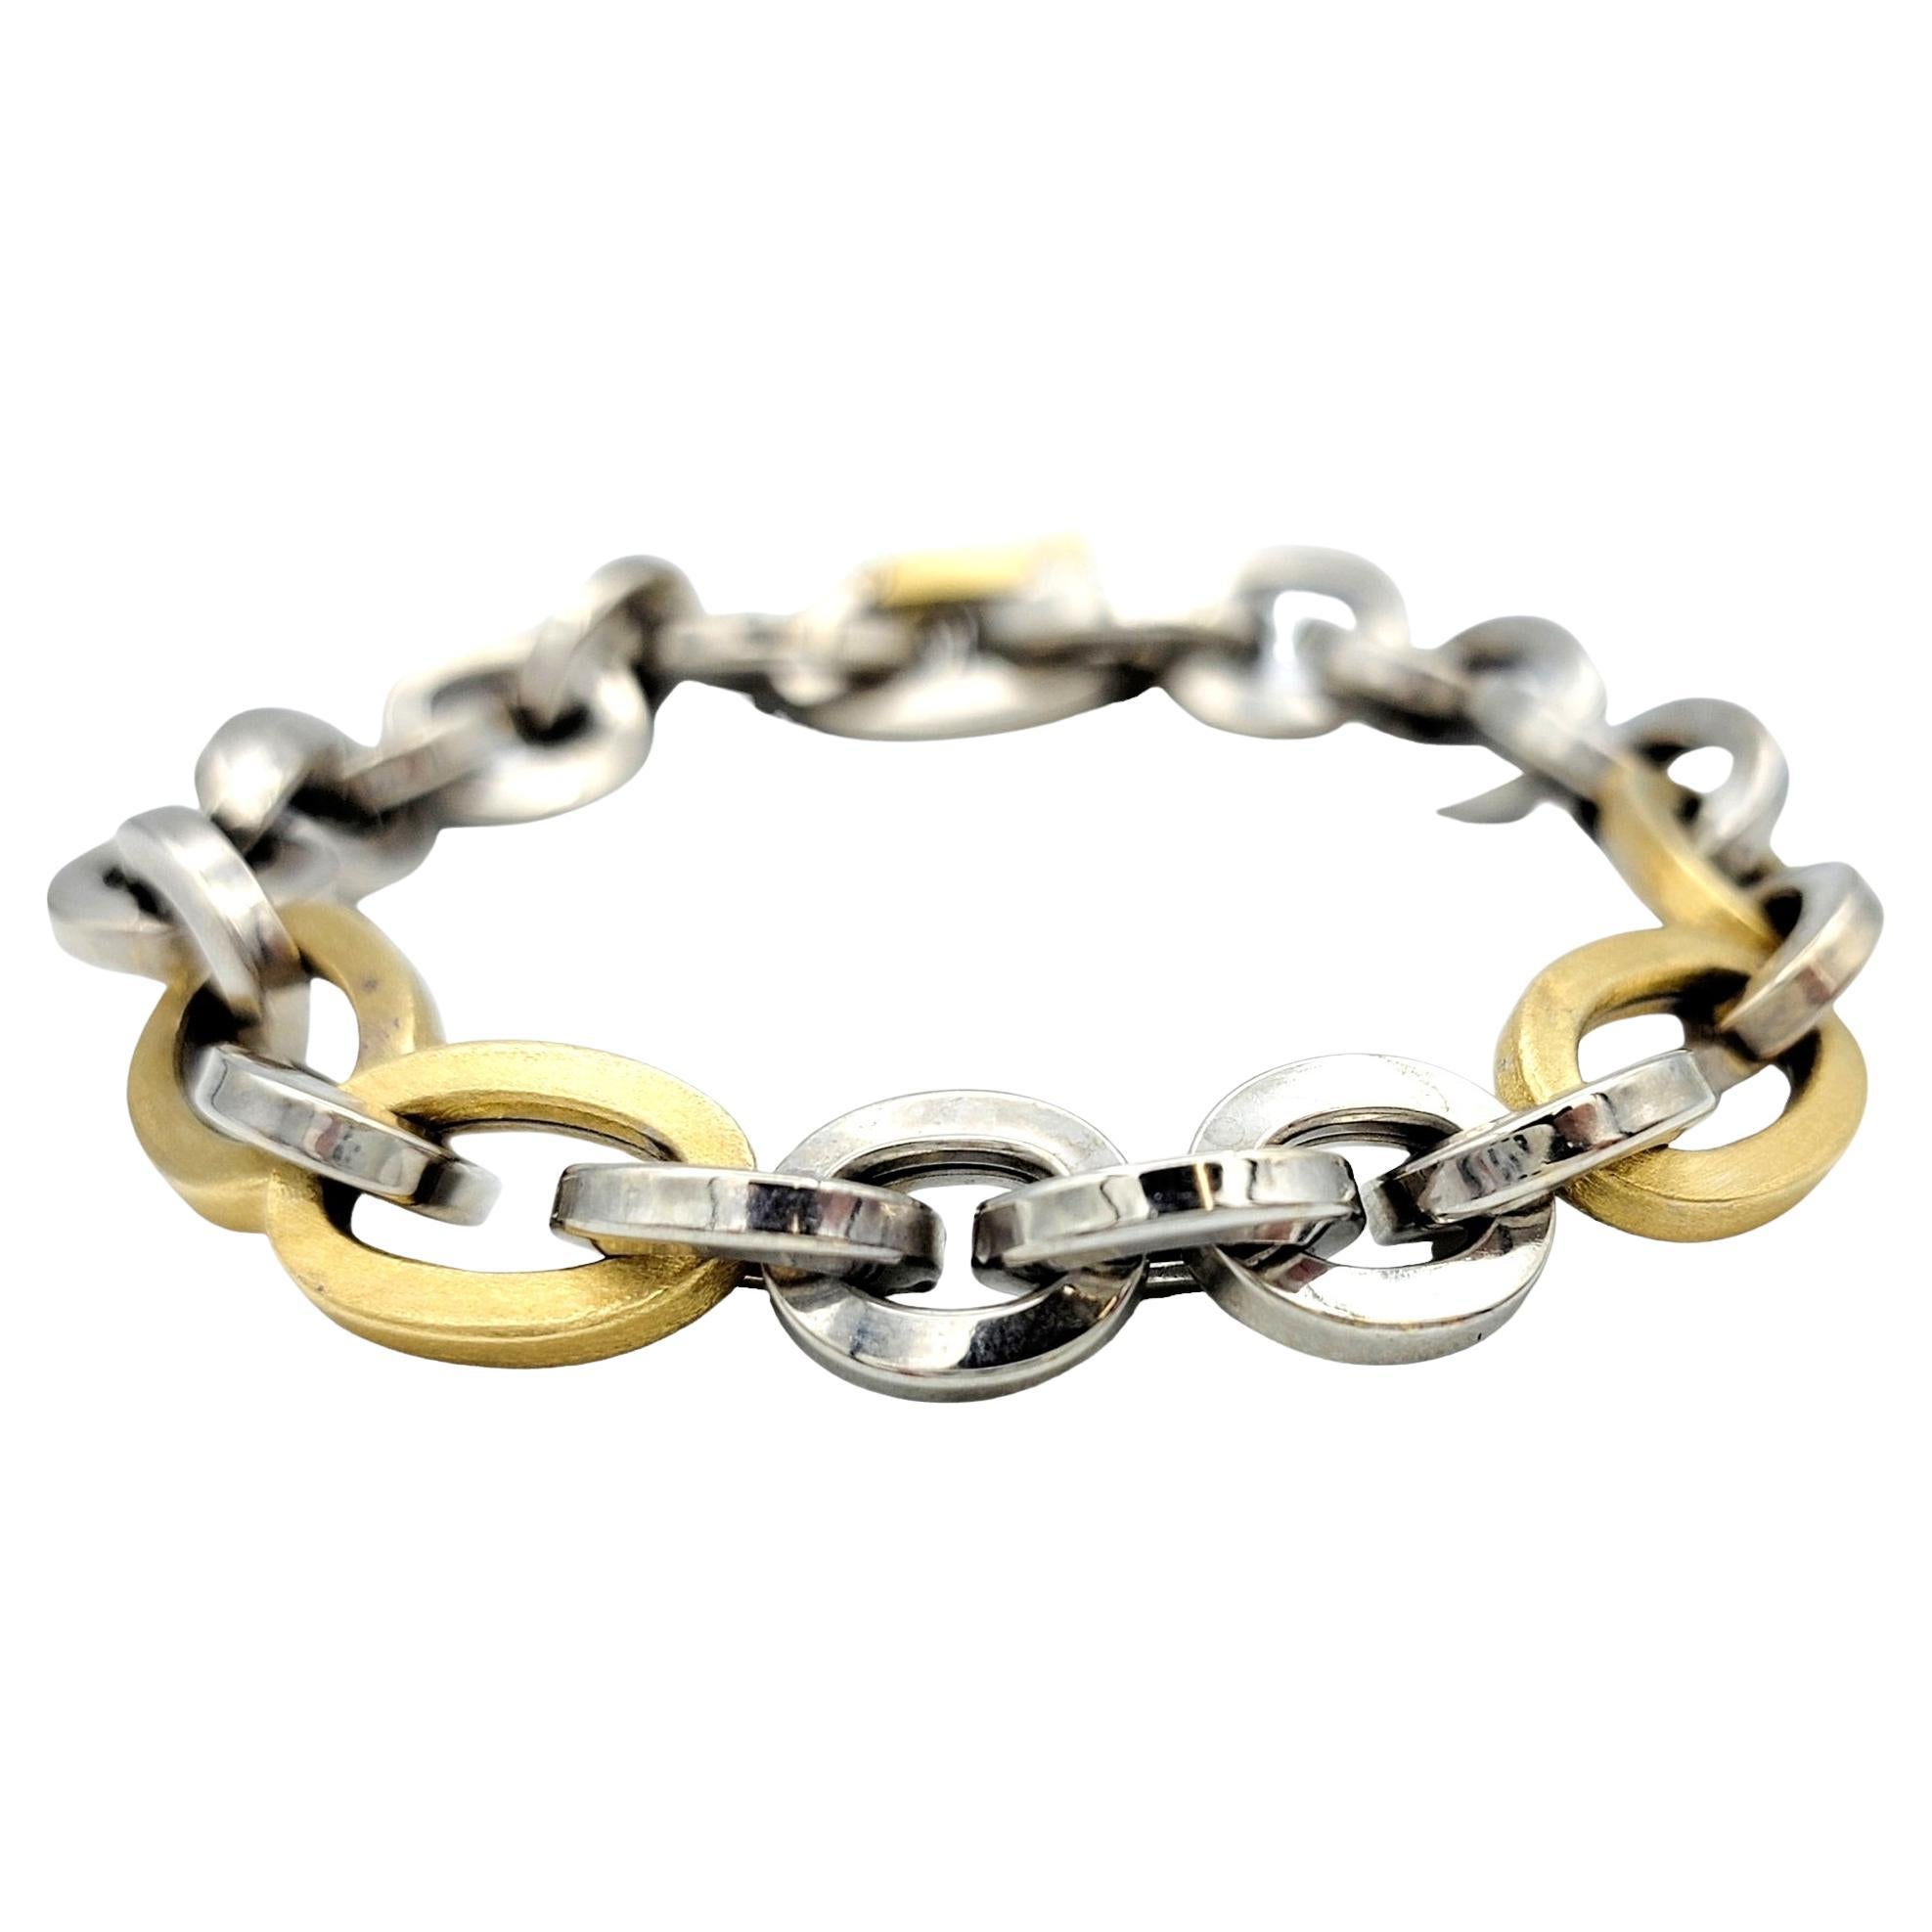 This opulent Unoaerre chain bracelet stands as a testament to bold elegance with its large, chunky links crafted in luxurious 18 karat gold. The striking design features an arresting contrast between gleaming yellow gold links and the cool,